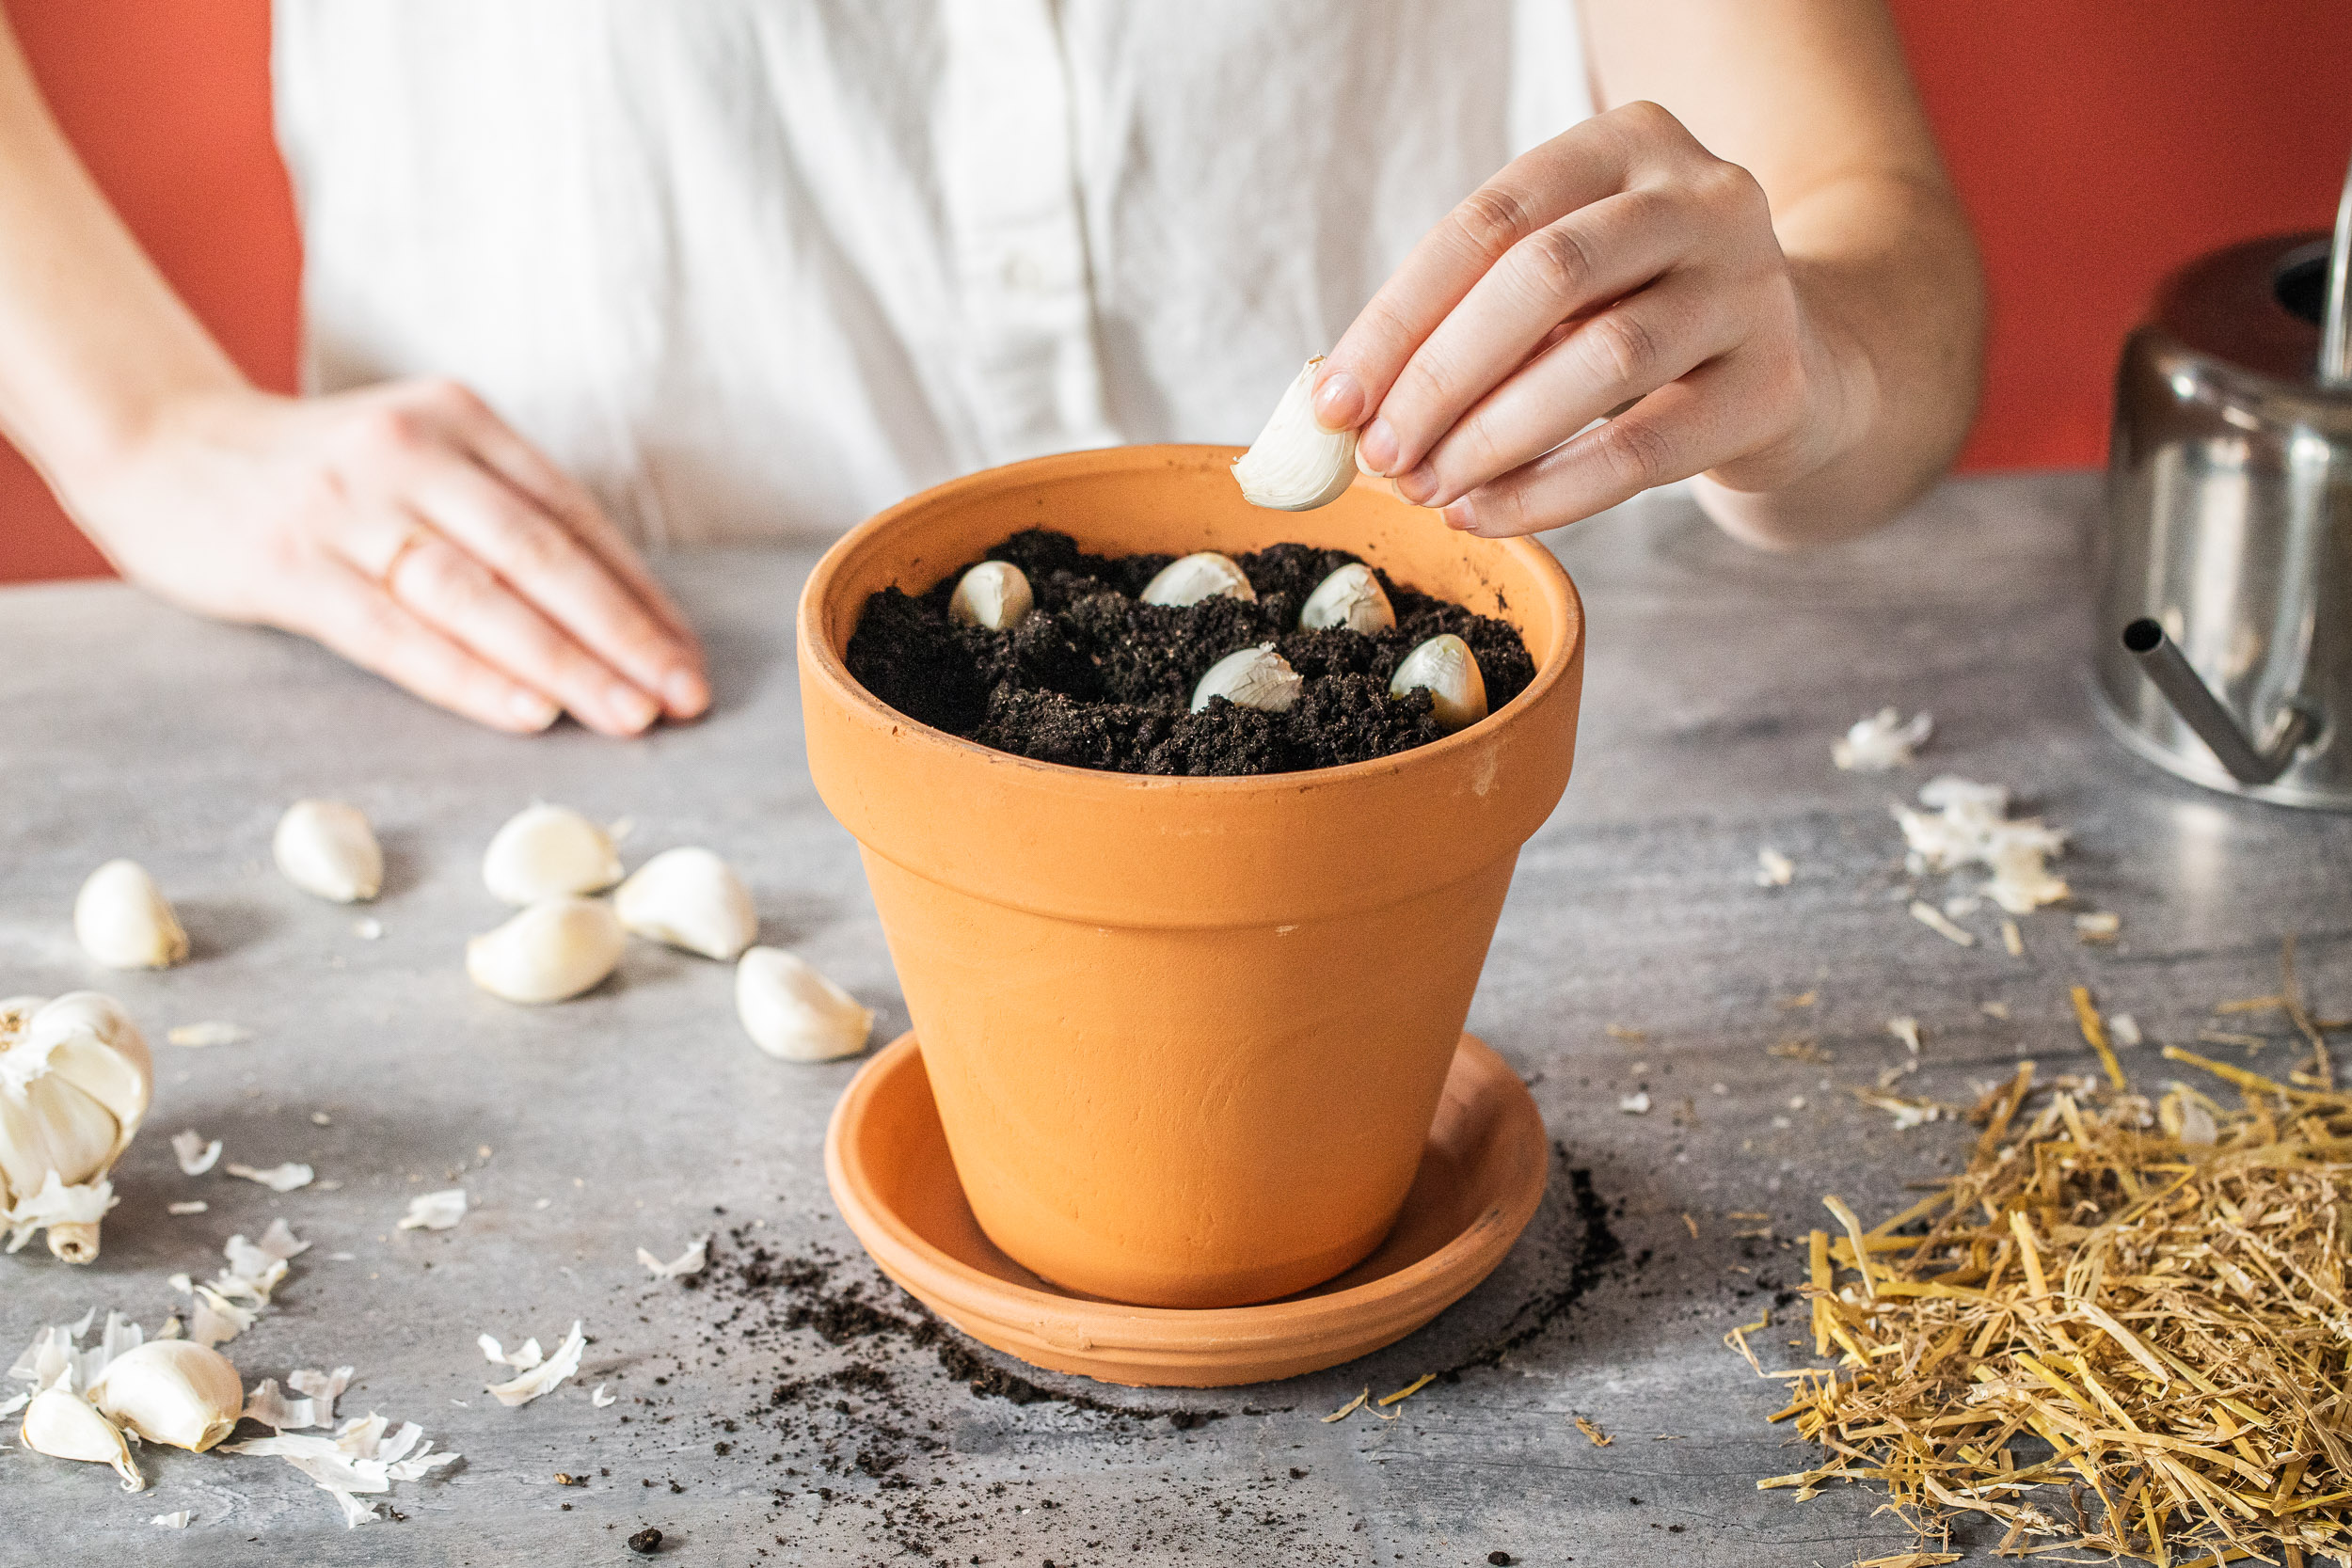 putting garlic into a pot with soil for growing at home and indoors